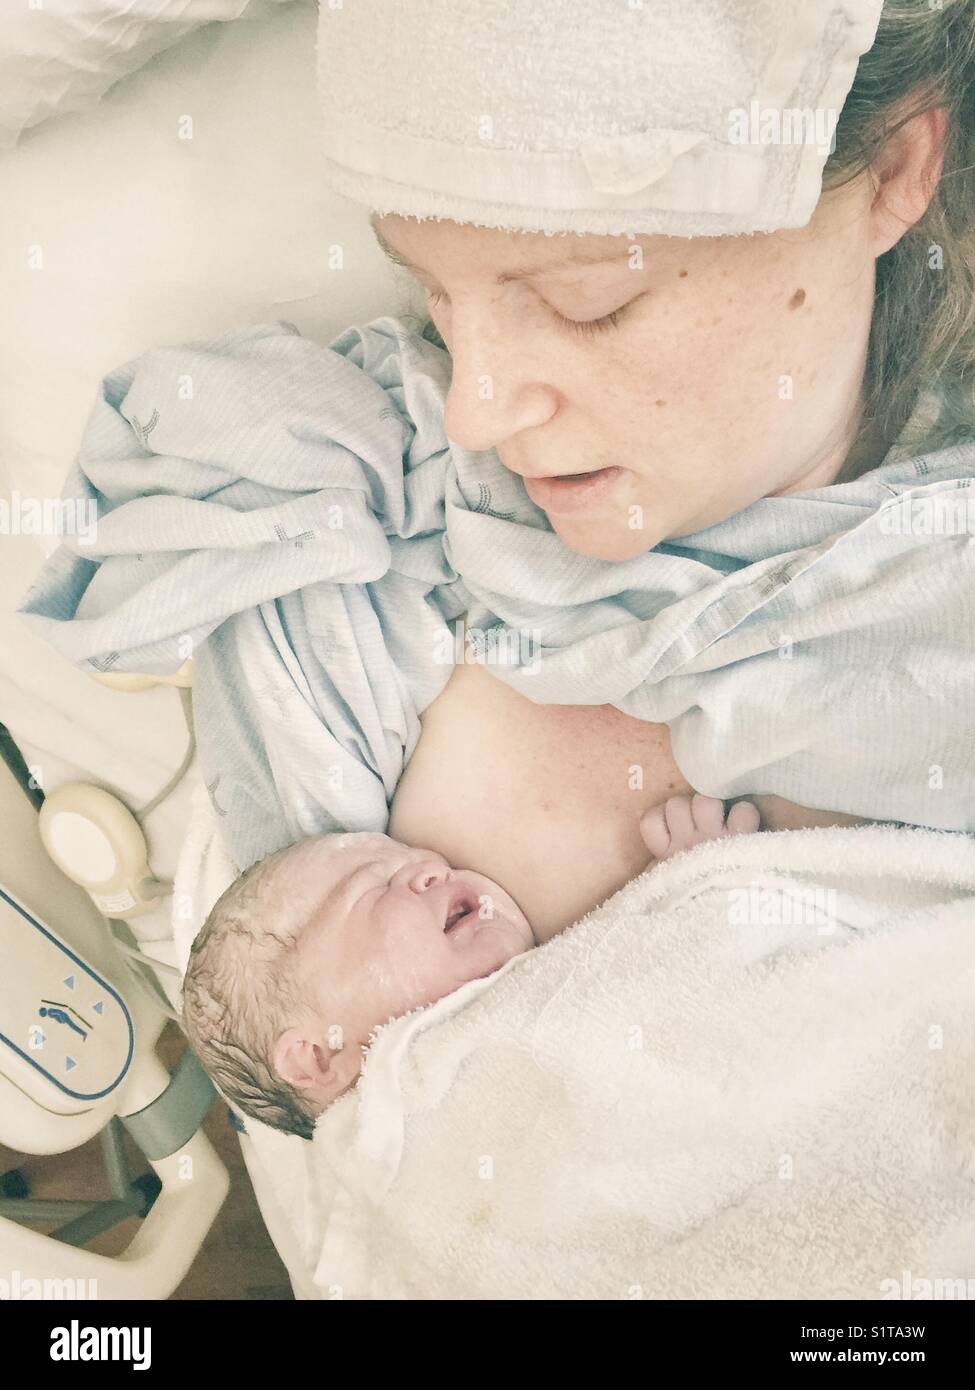 Real image of new mother with just born newborn on chest immediately after giving birth Stock Photo